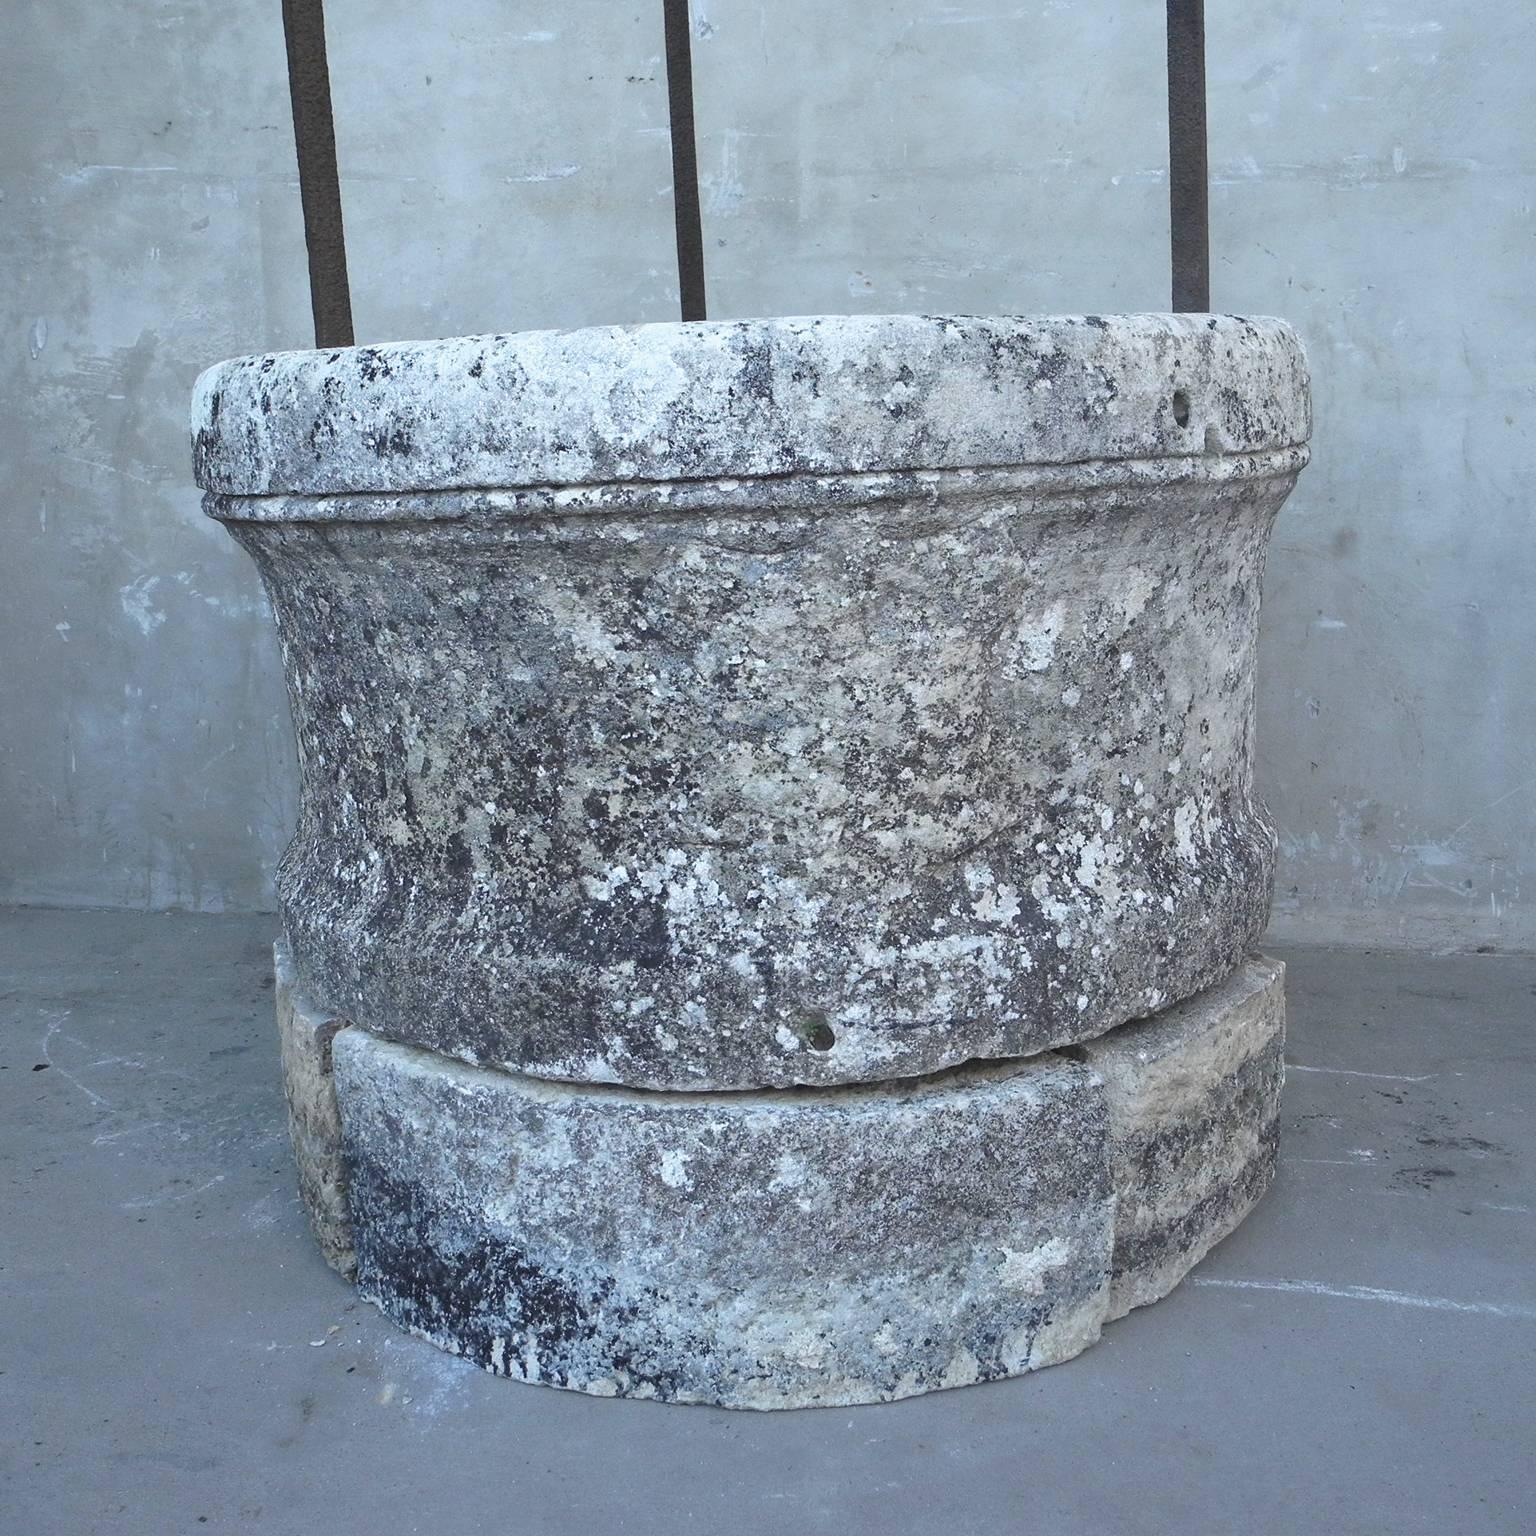 Antique 17th circa well from a garden in uzes, a town in the Languedoc-Roussillon Region of France.